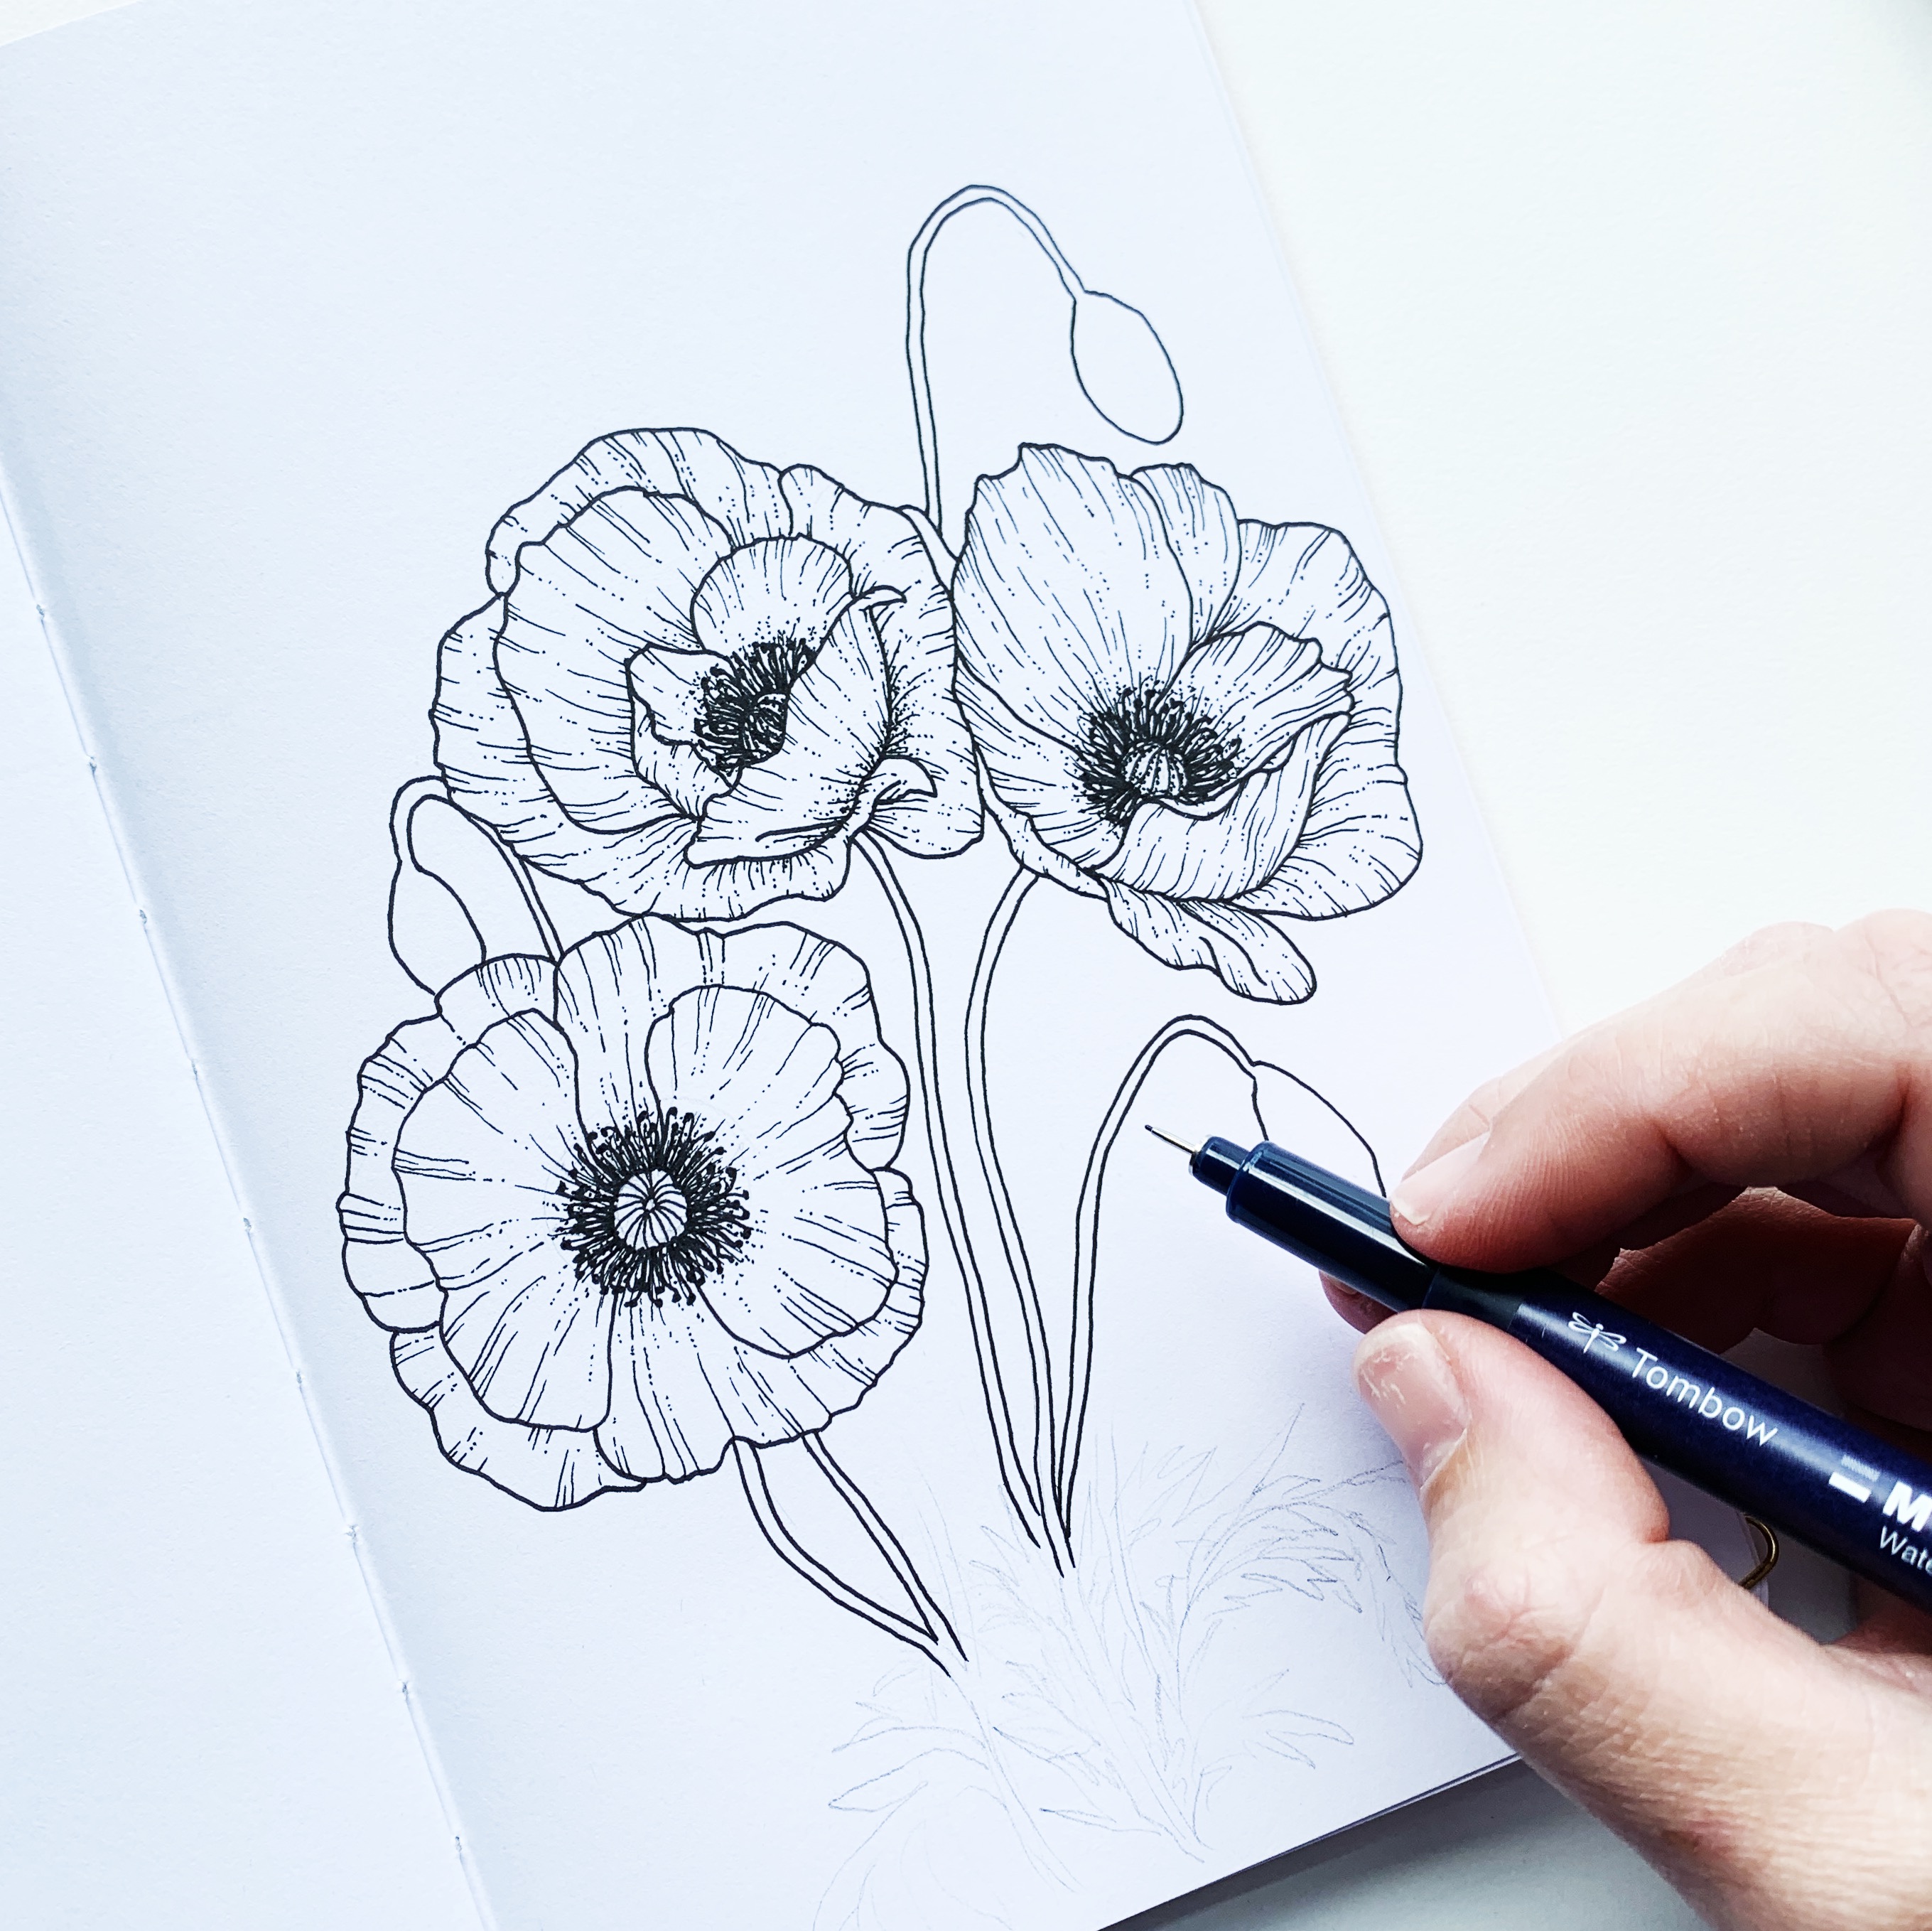 Learn how to draw poppy flowers using Tombow MONO Drawing Pens with Adrienne from @studio80design!